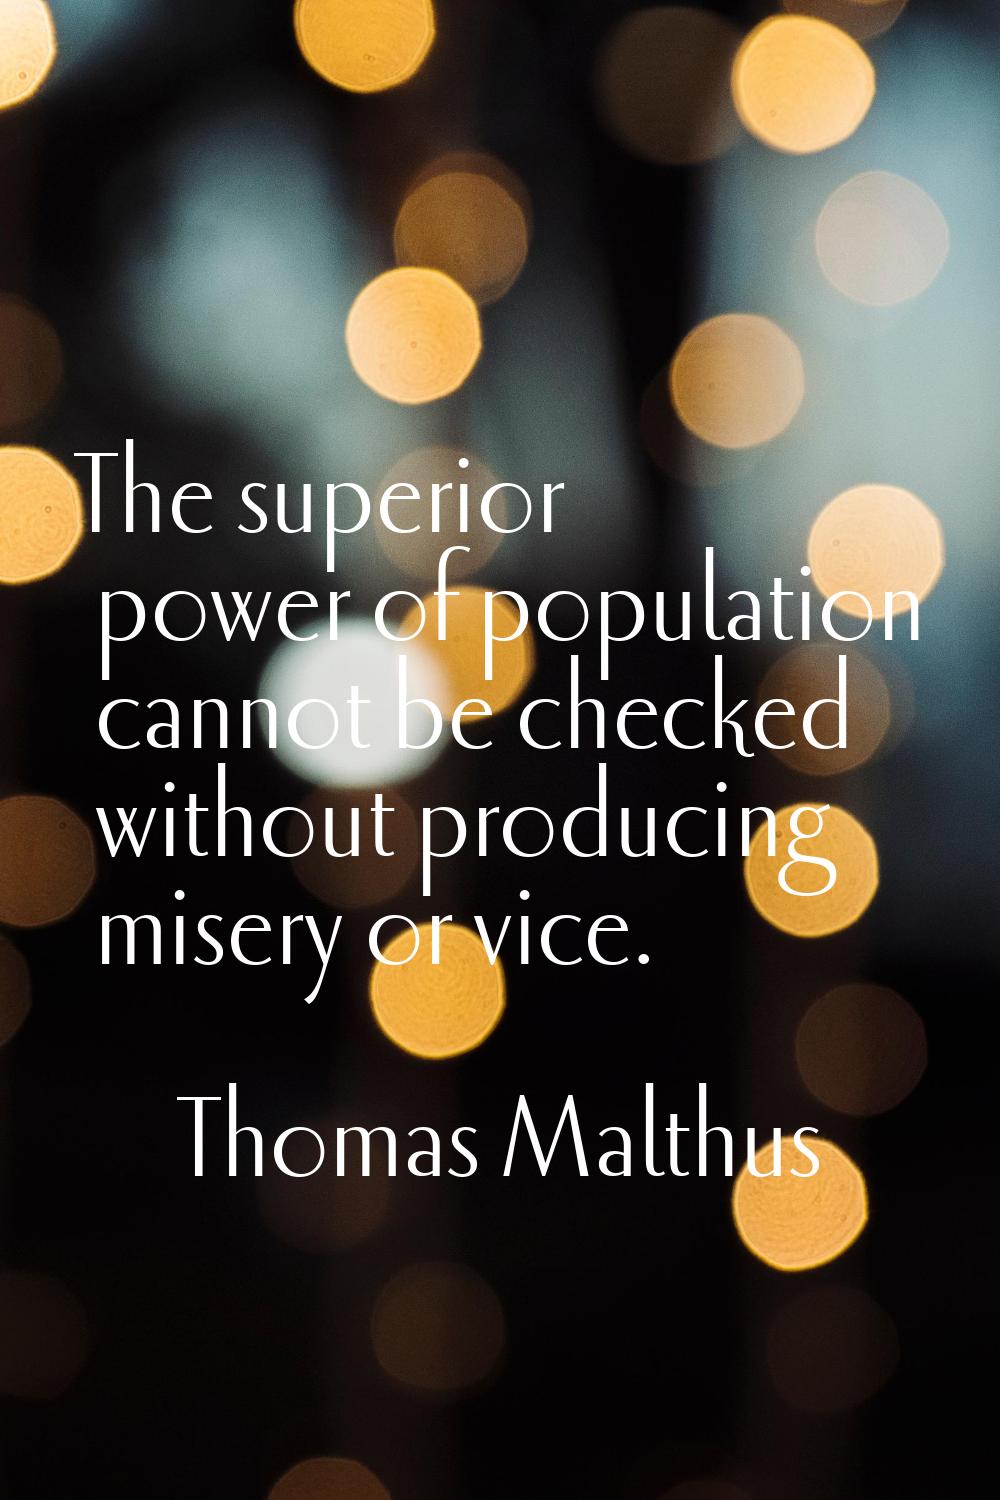 The superior power of population cannot be checked without producing misery or vice.